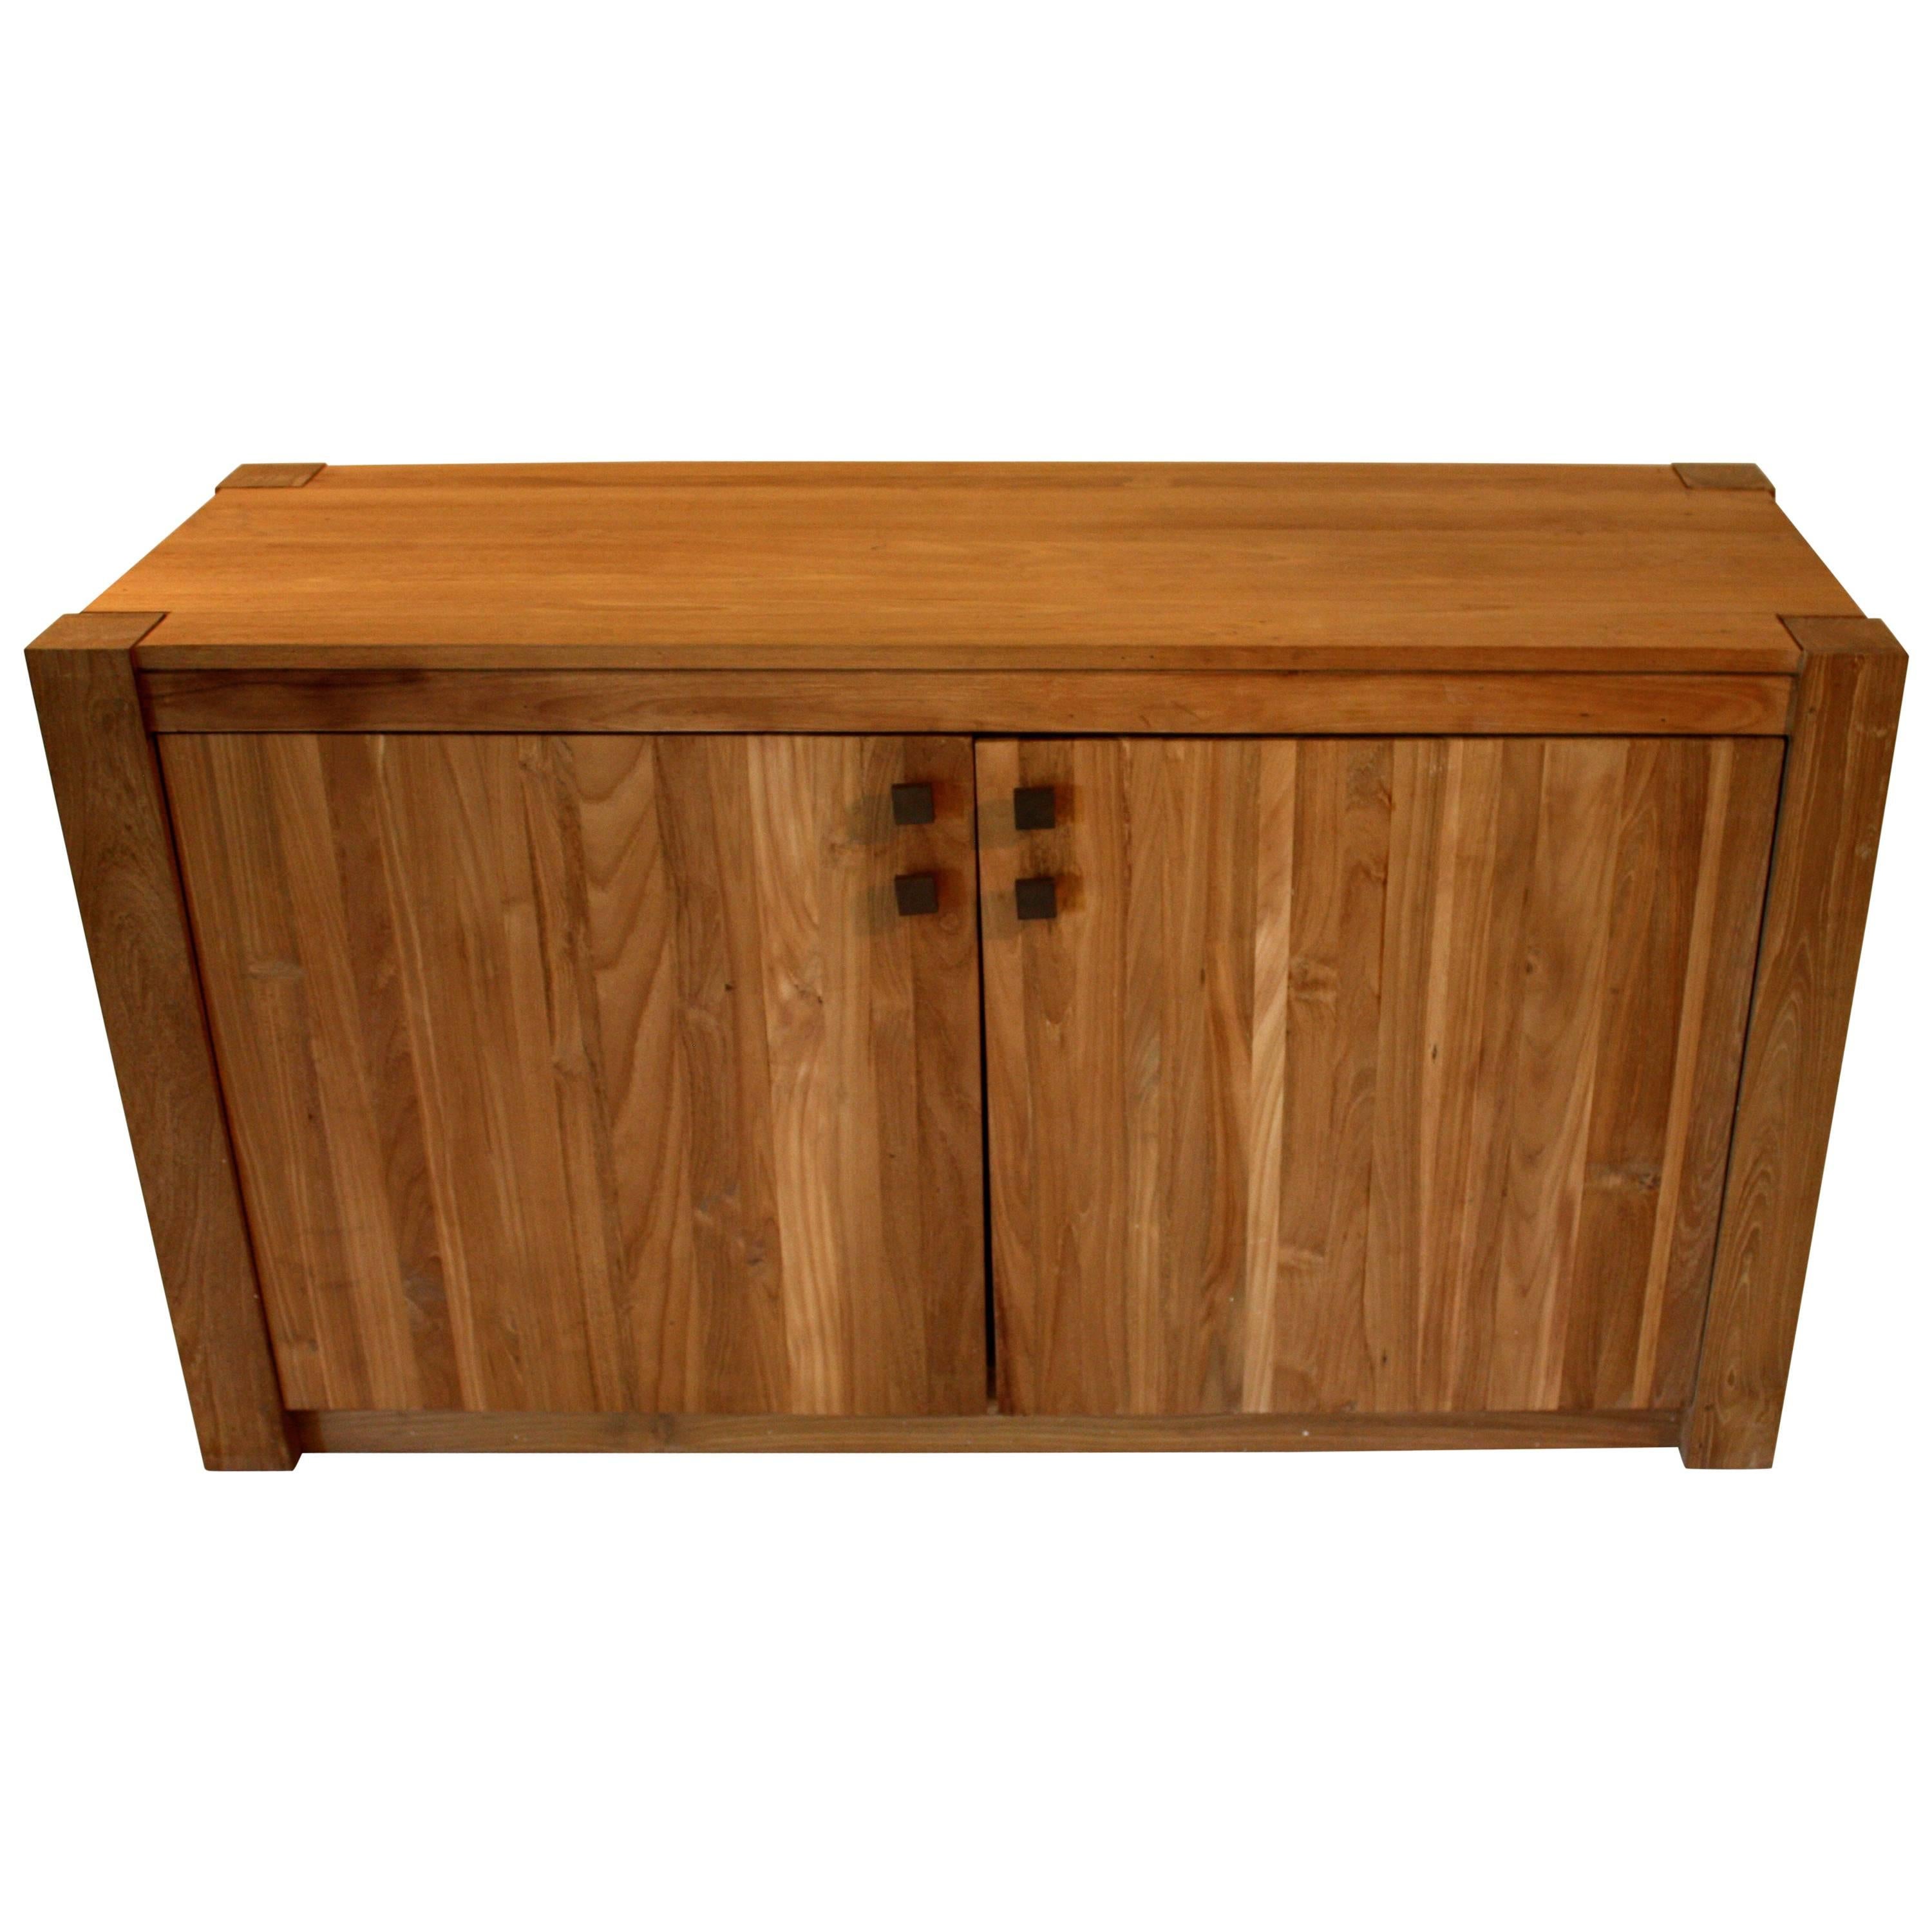 Cypress Wood Cabinet For Sale